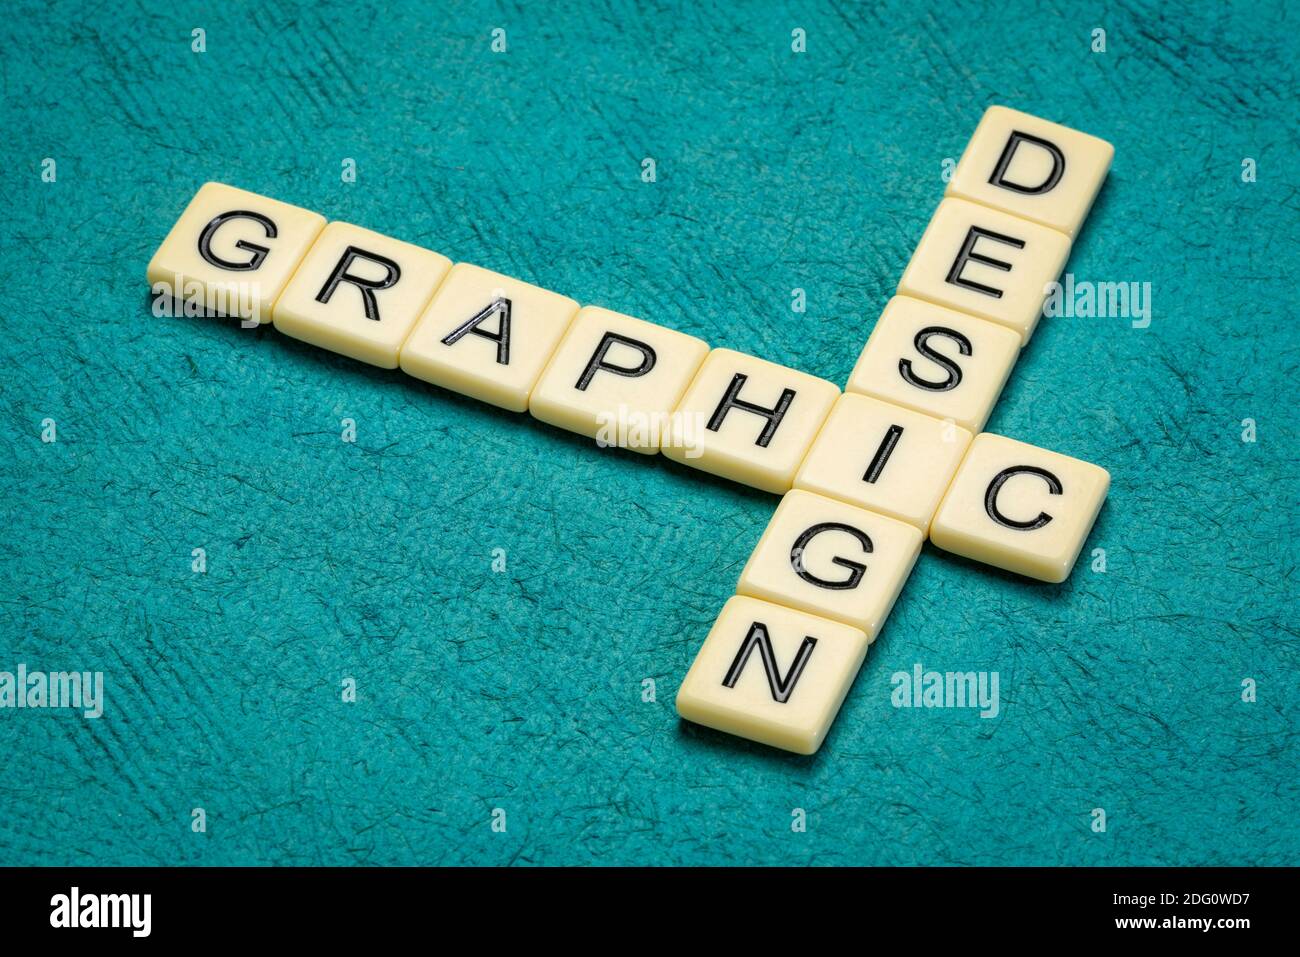 graphic design crossword in ivory letter tiles against textured handmade paper, vidual content and communication concept Stock Photo